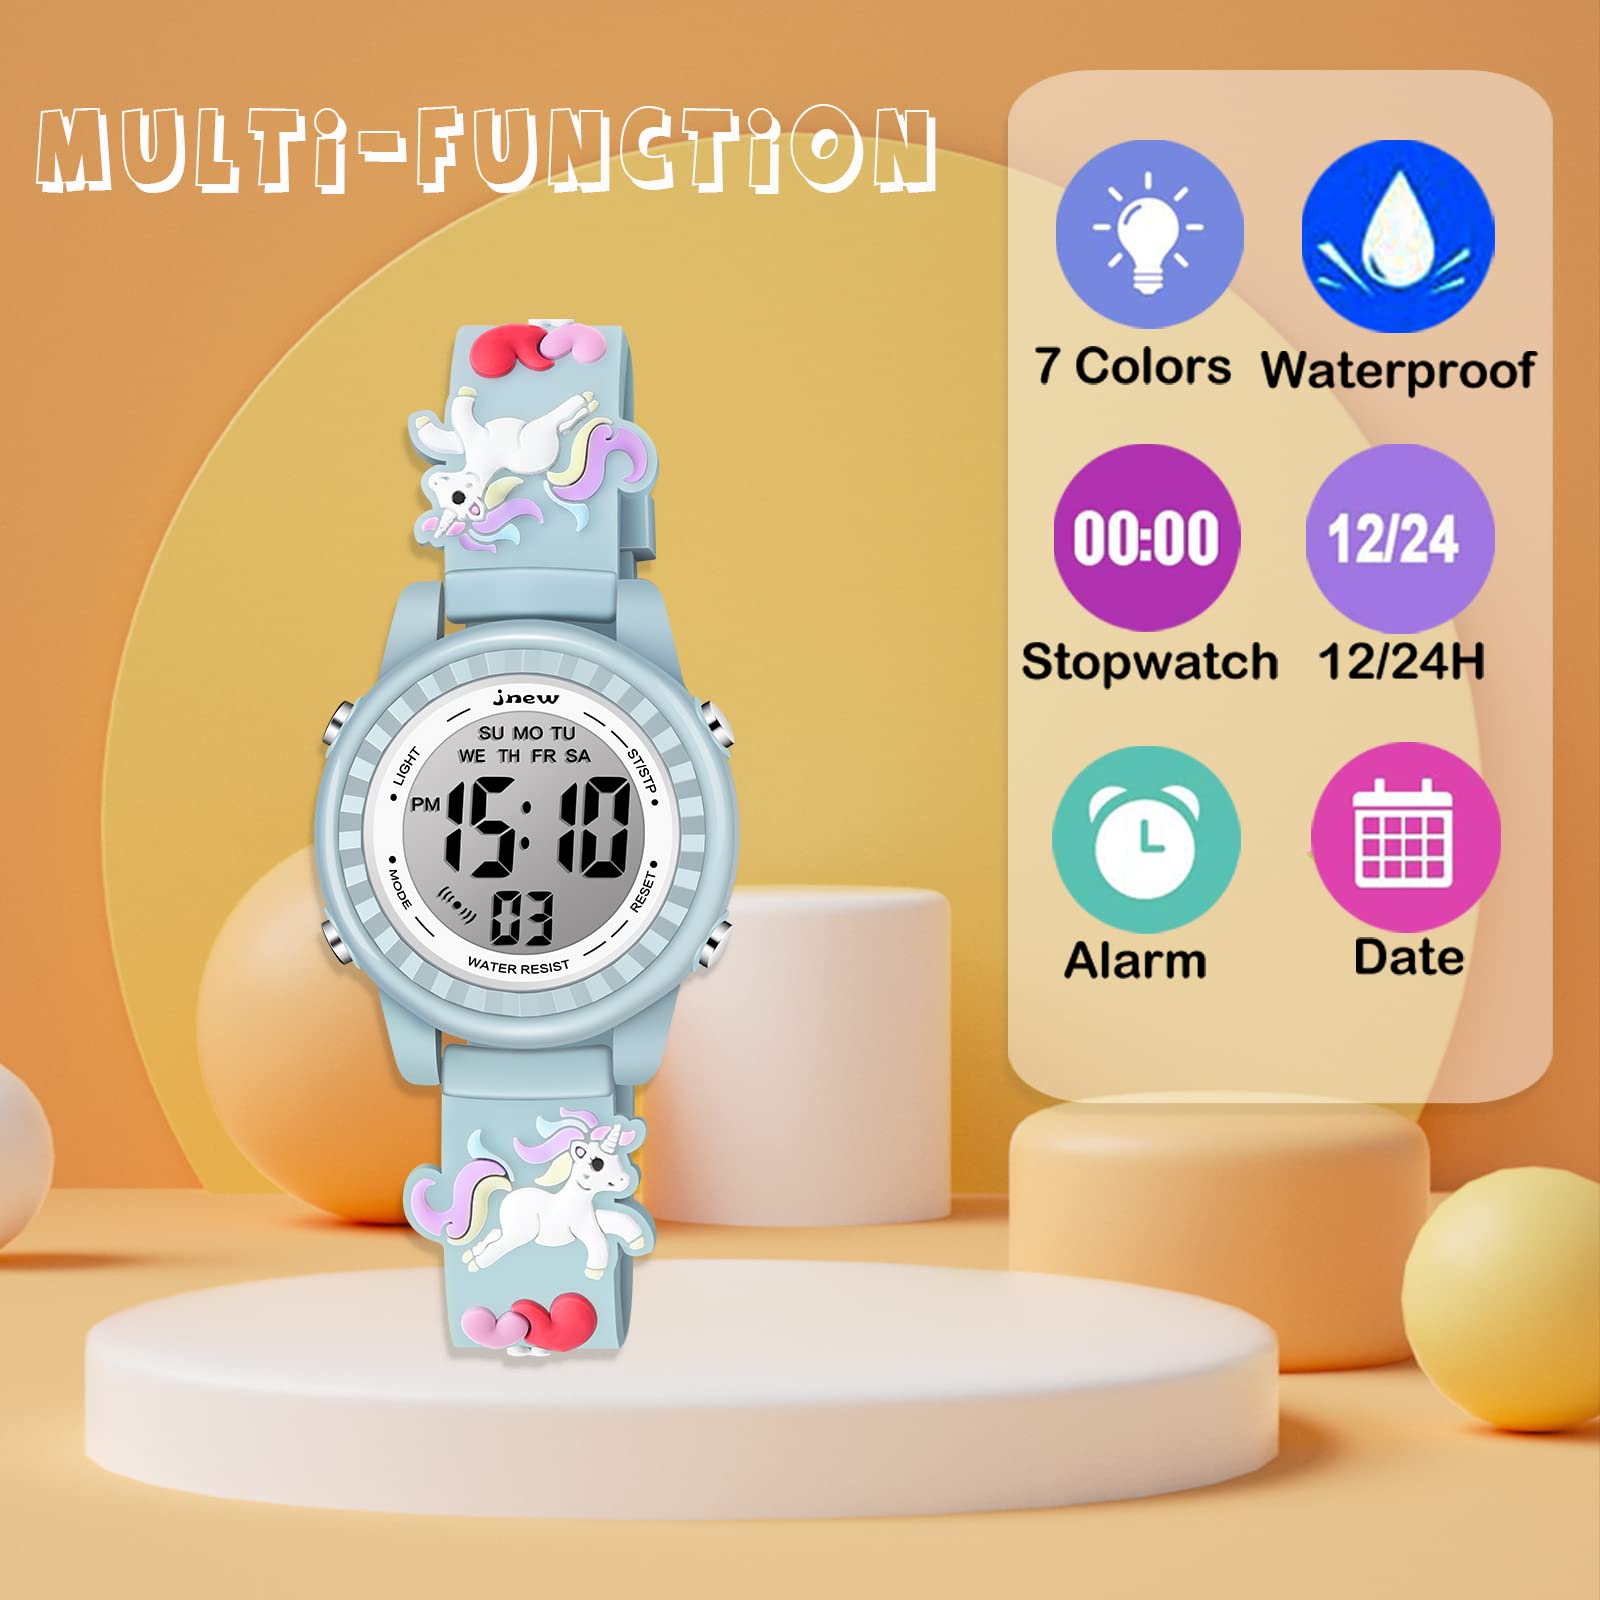 Venhoo Kids Watches 3D Cartoon Waterproof 7 Color Lights Toddler Wrist Digital Watch with Alarm Stopwatch for 3-10 Year Girls Little Child